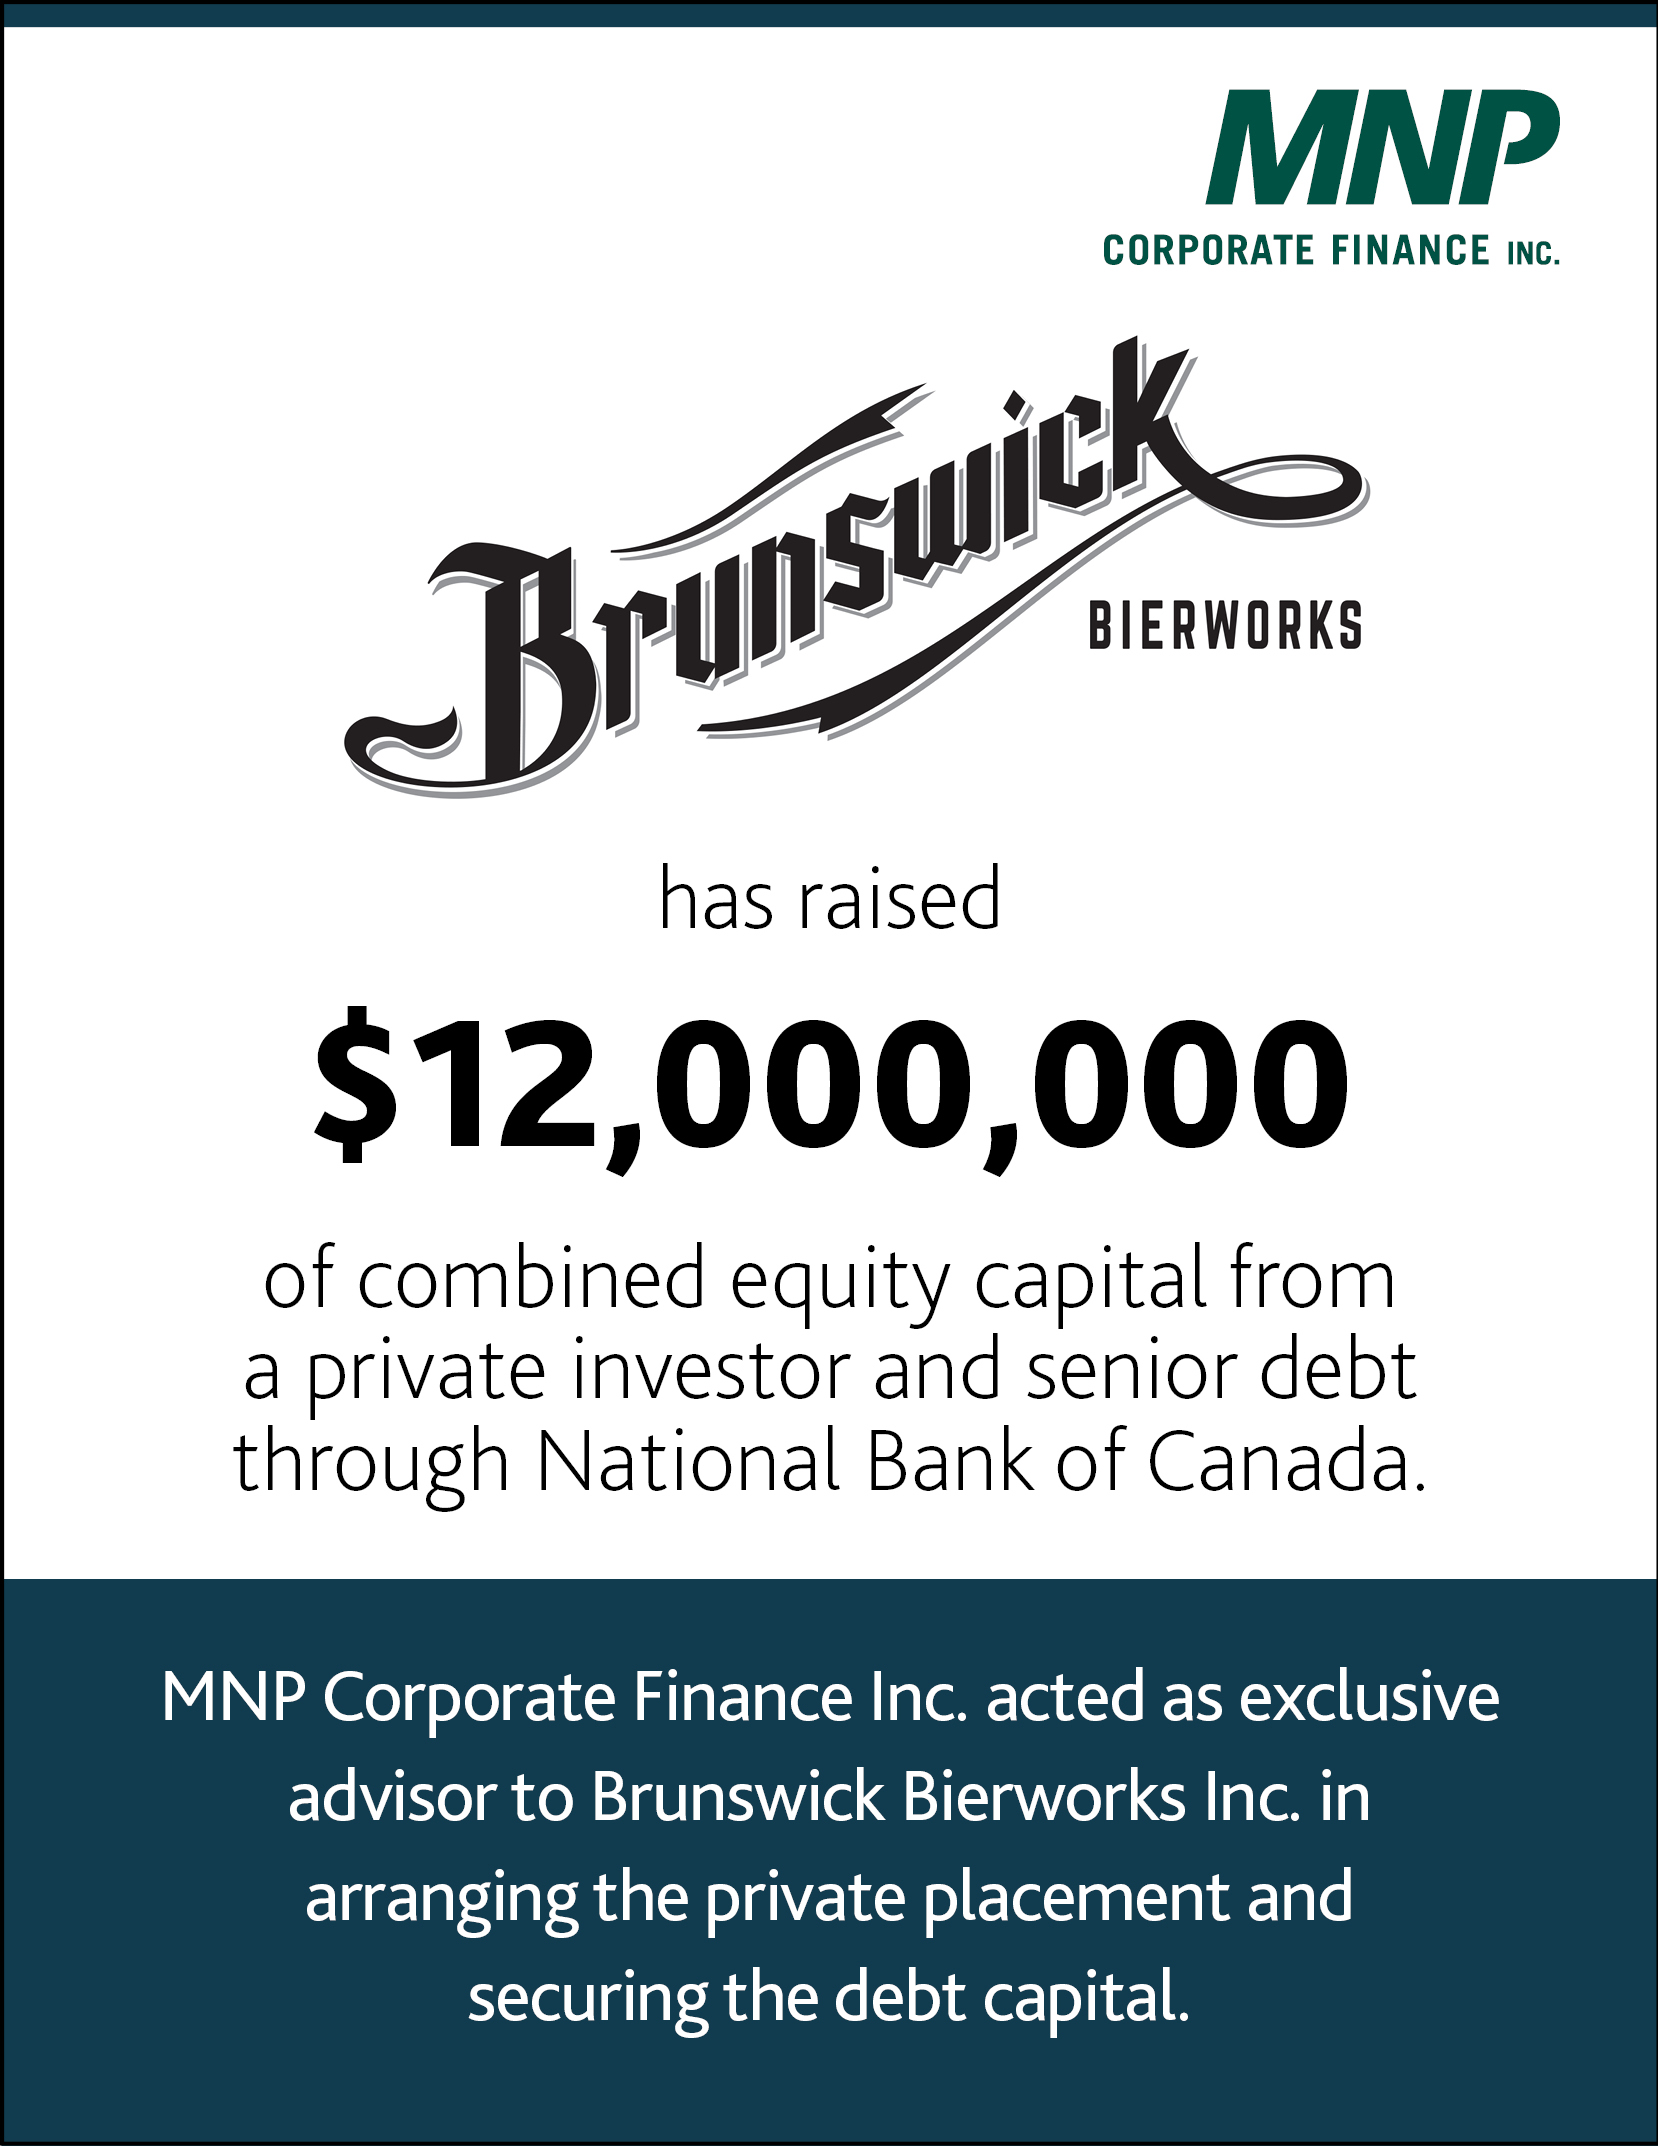 Brunswick Bierworks has raised $12,000,000 of combined equity capital from a private investor and senior debt through National Bank of Canada.